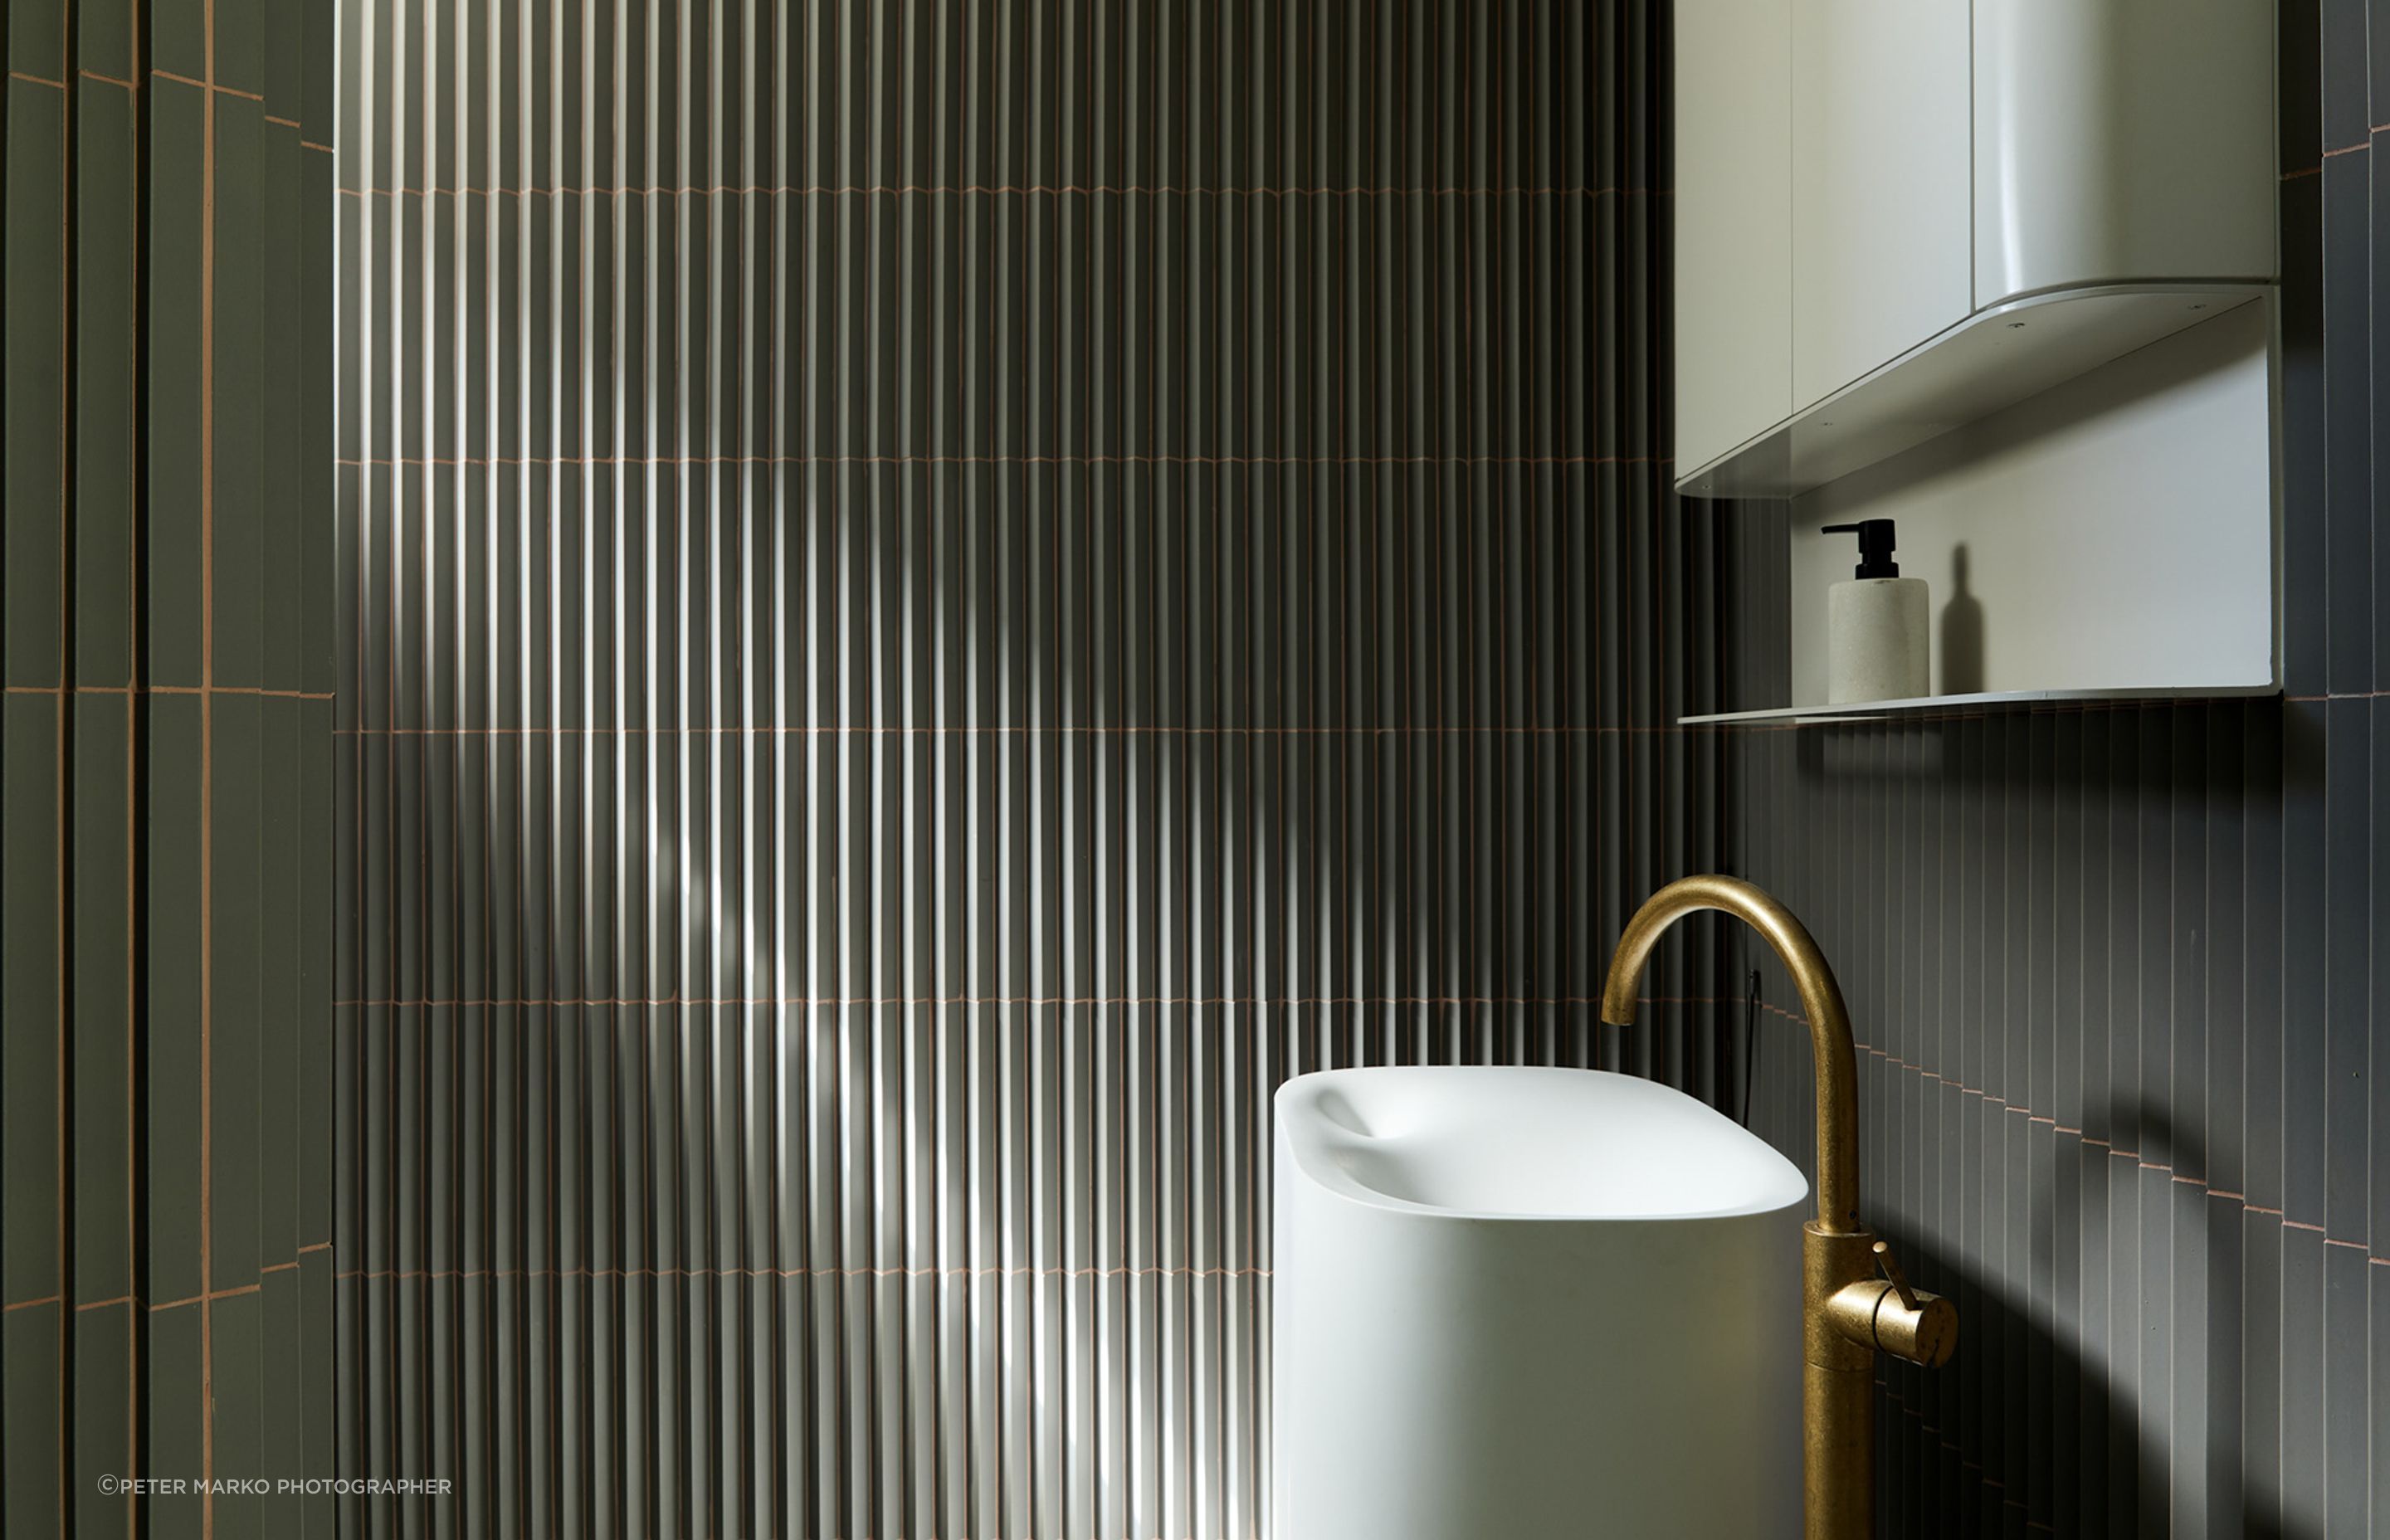 Textured tiles a treat to the eye at Malvern Residence